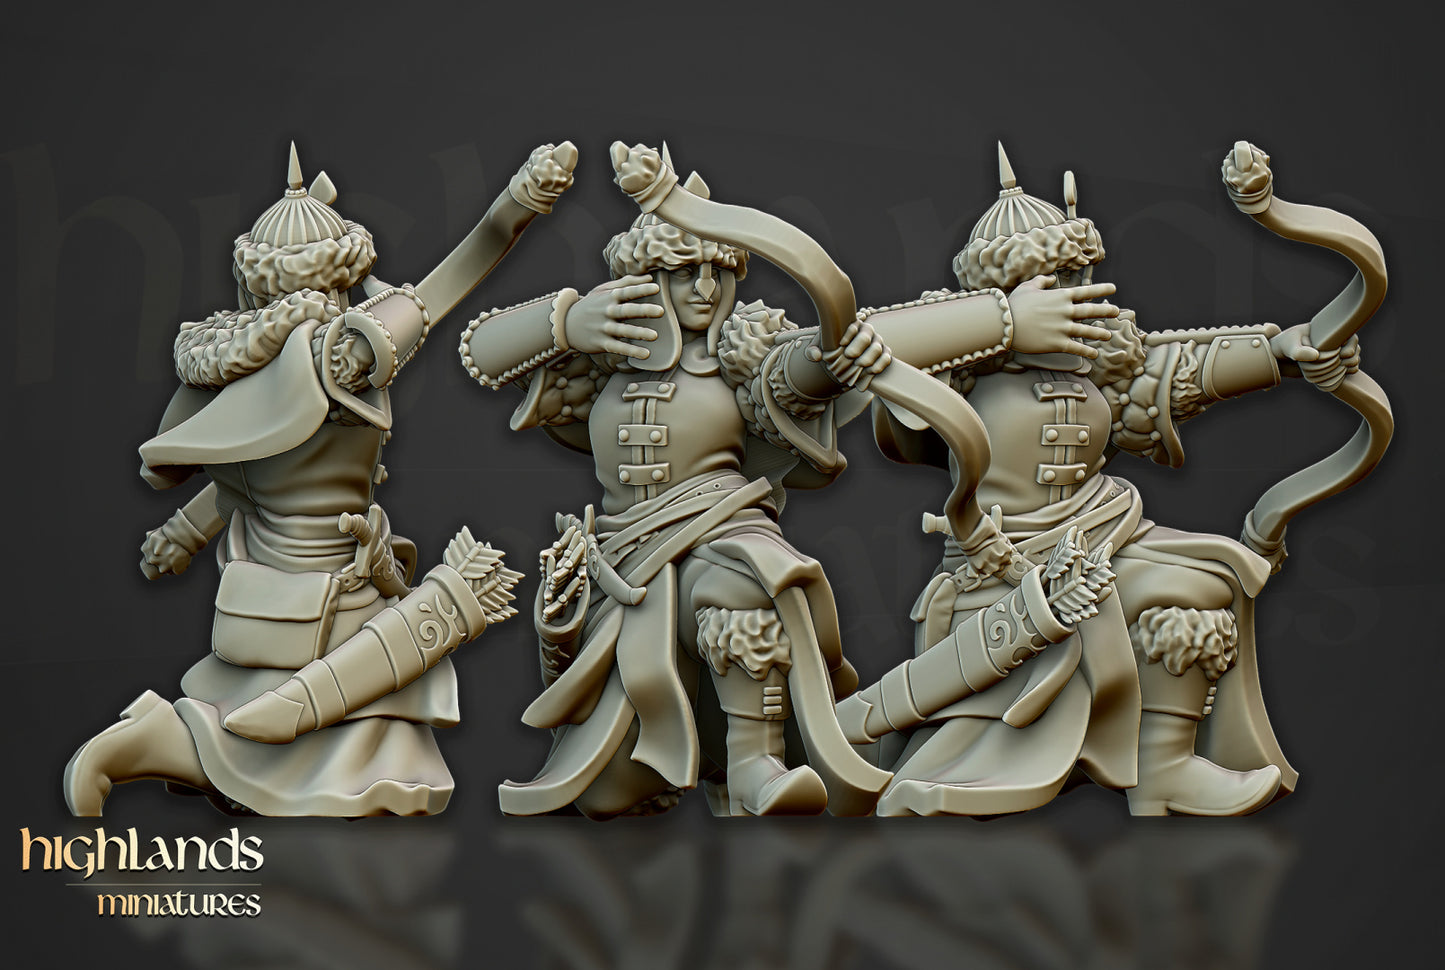 28mm Daughters of Volhynia with Bows - Kislev Empire